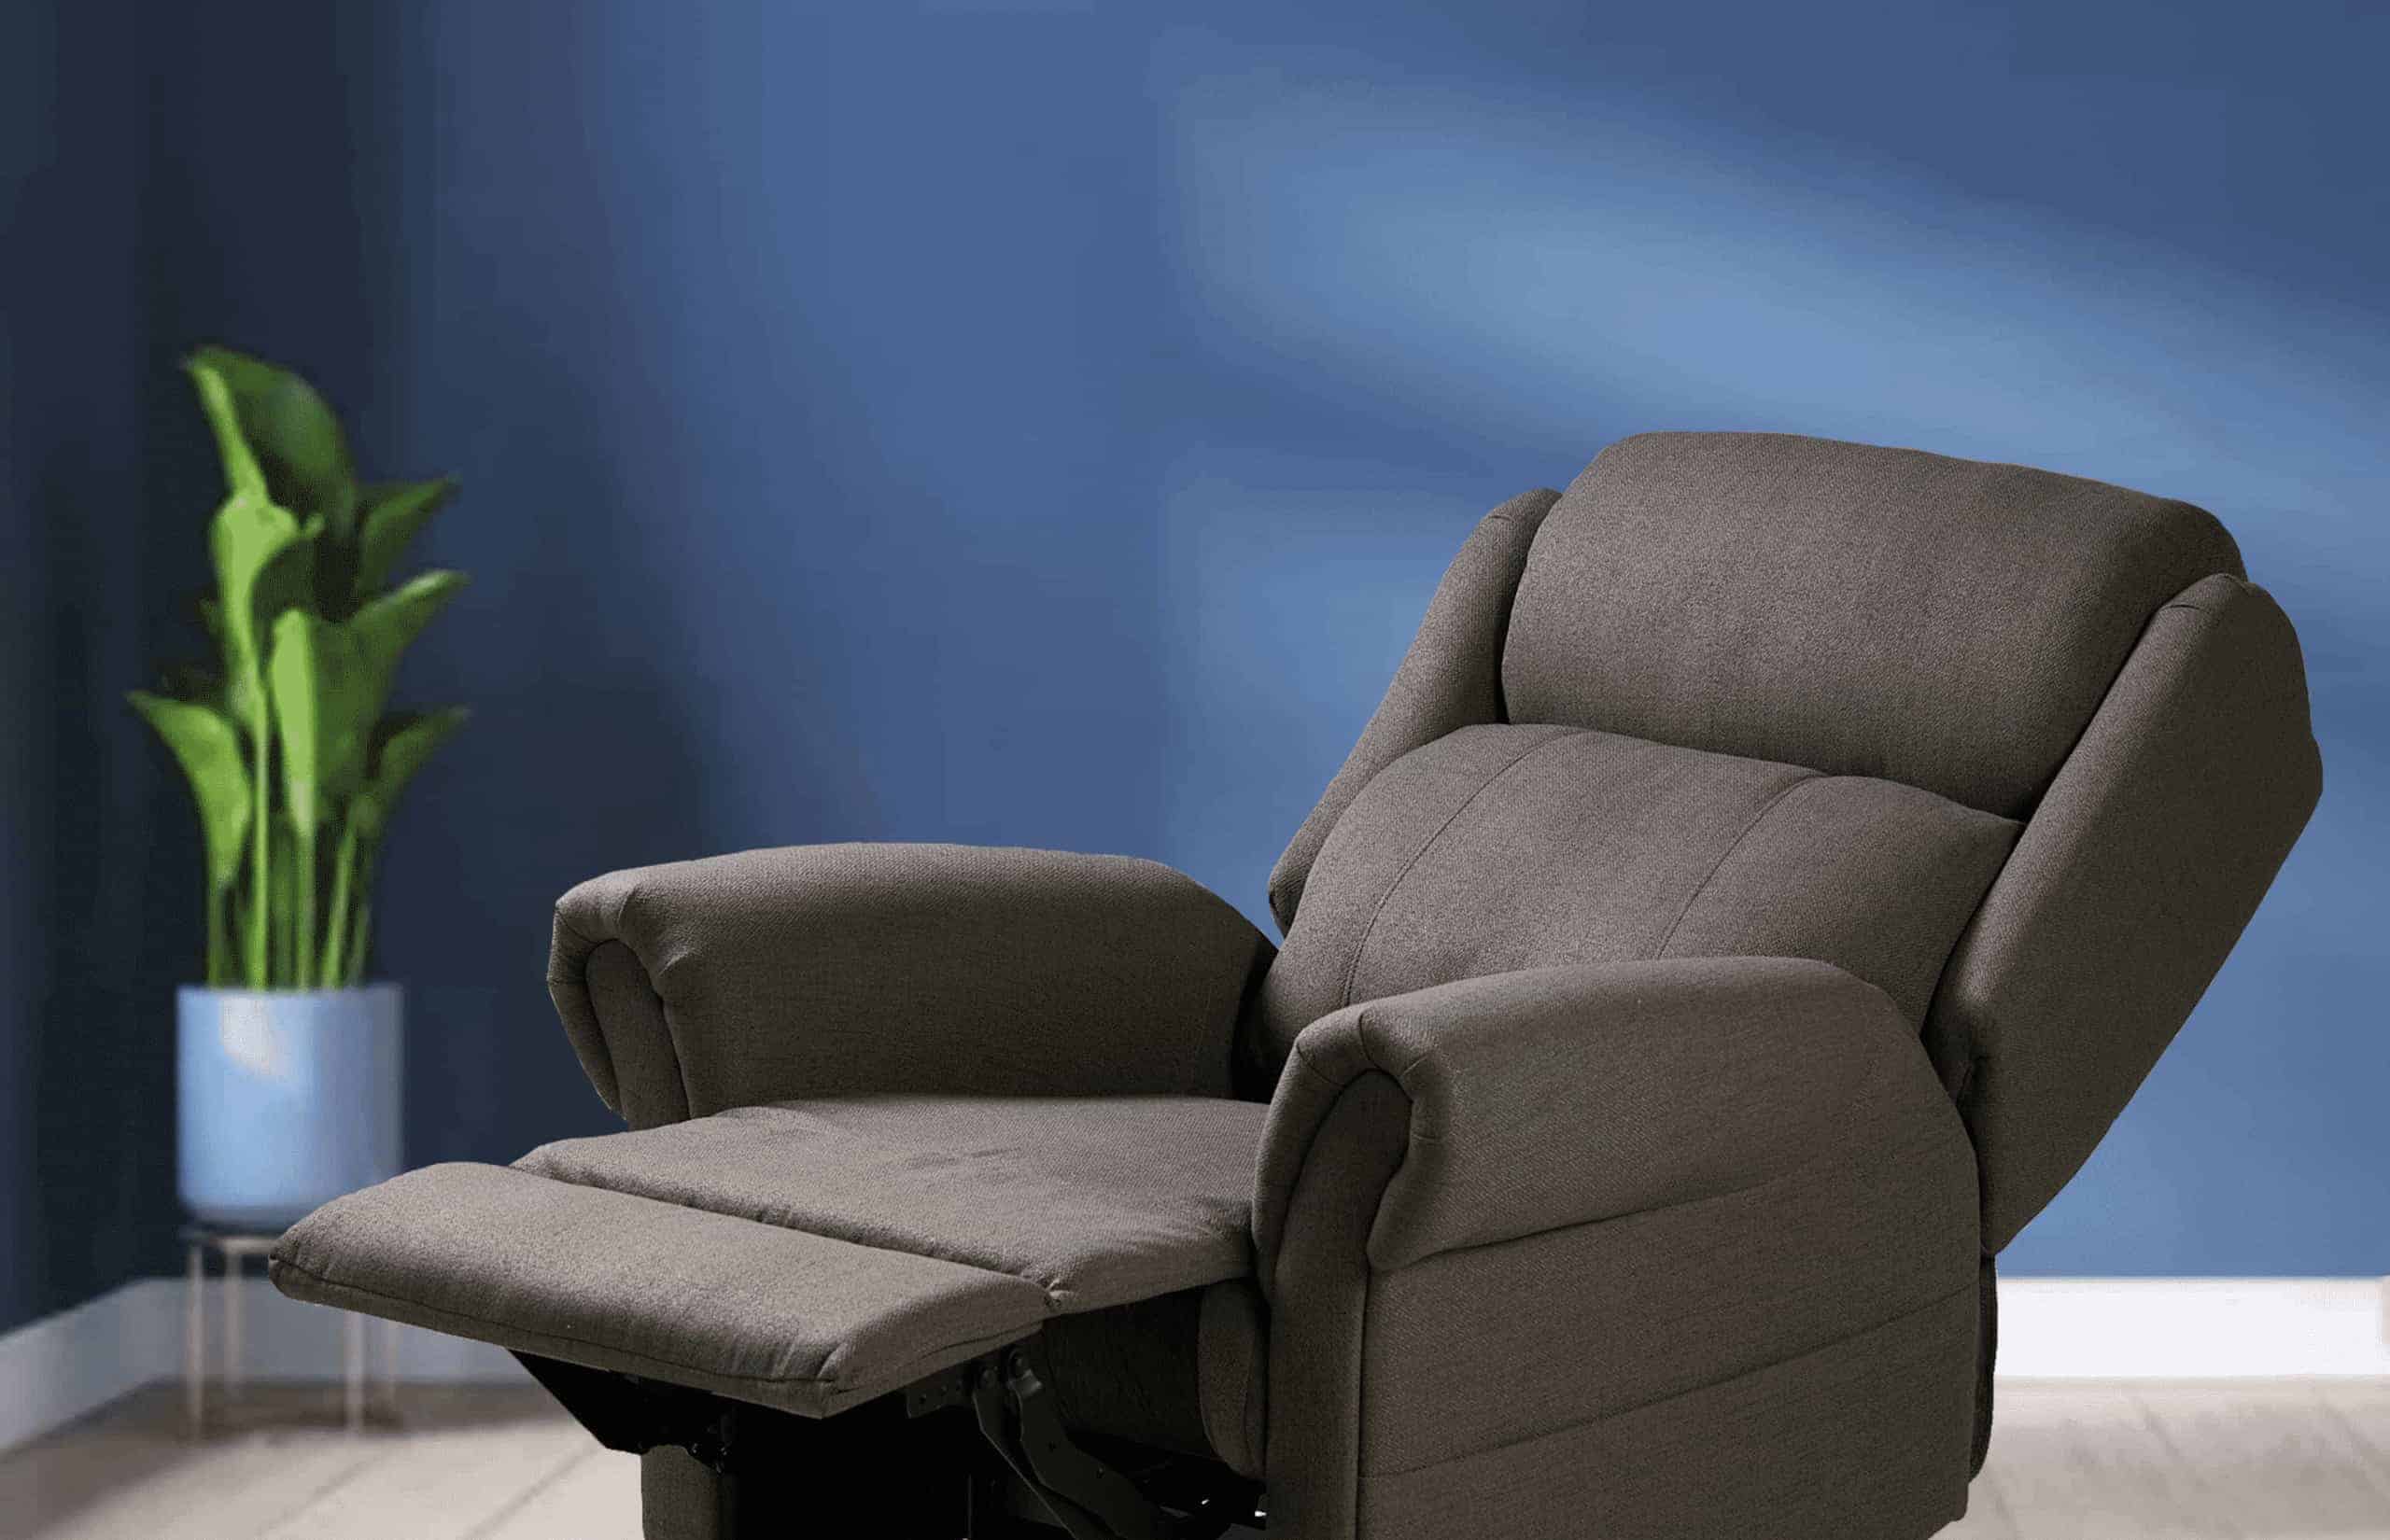 A products with a footrest and recliner in a room.